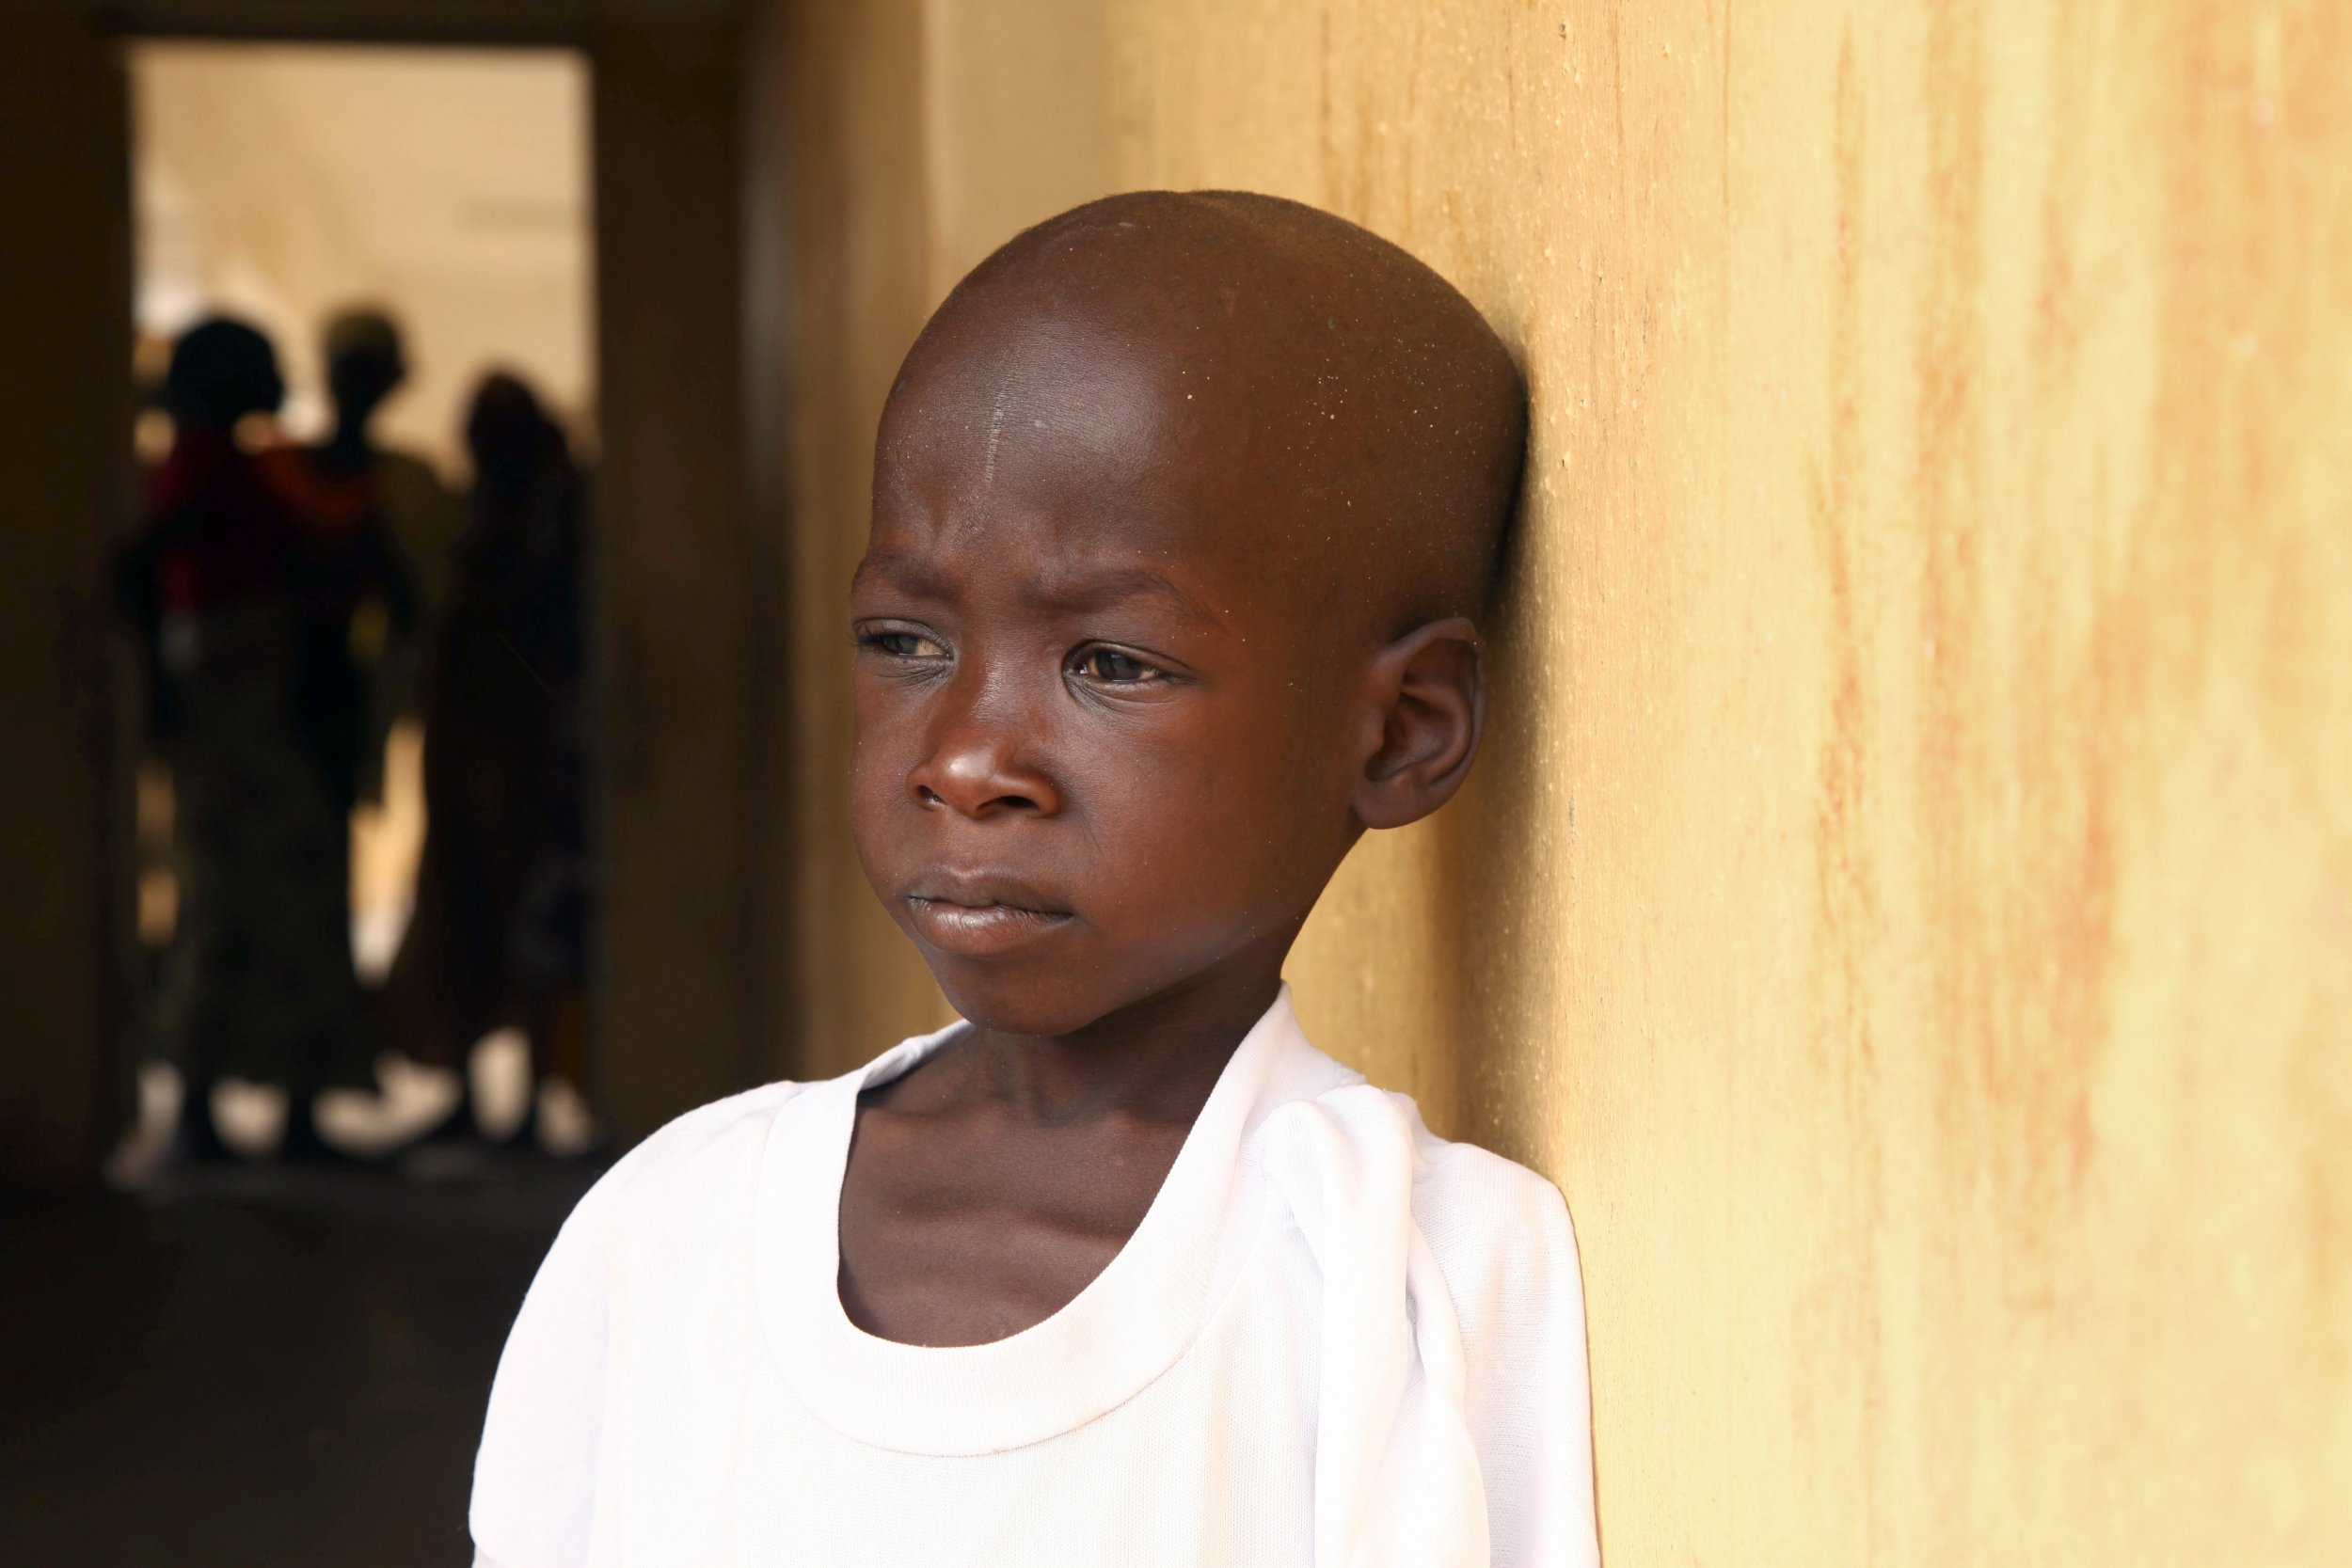 A malnourished Nigerian child rescued from Boko Haram at a refugee camp.